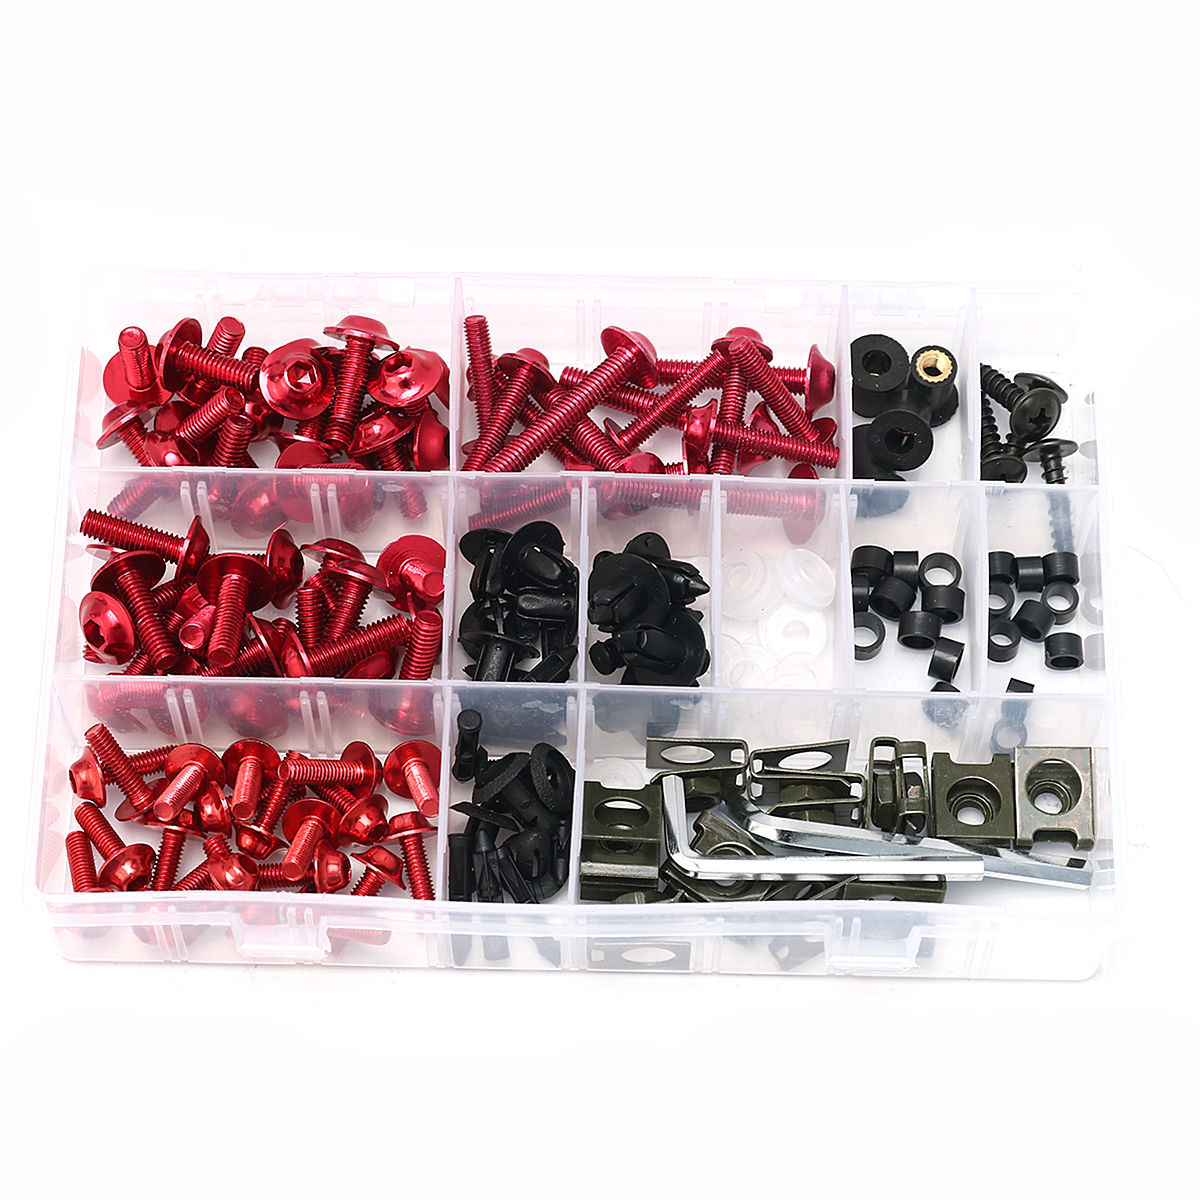 CNC Alloy Motorcycle Complete Fairing Bolt Bodywork Screws Nuts Kit For Kawasaki Red